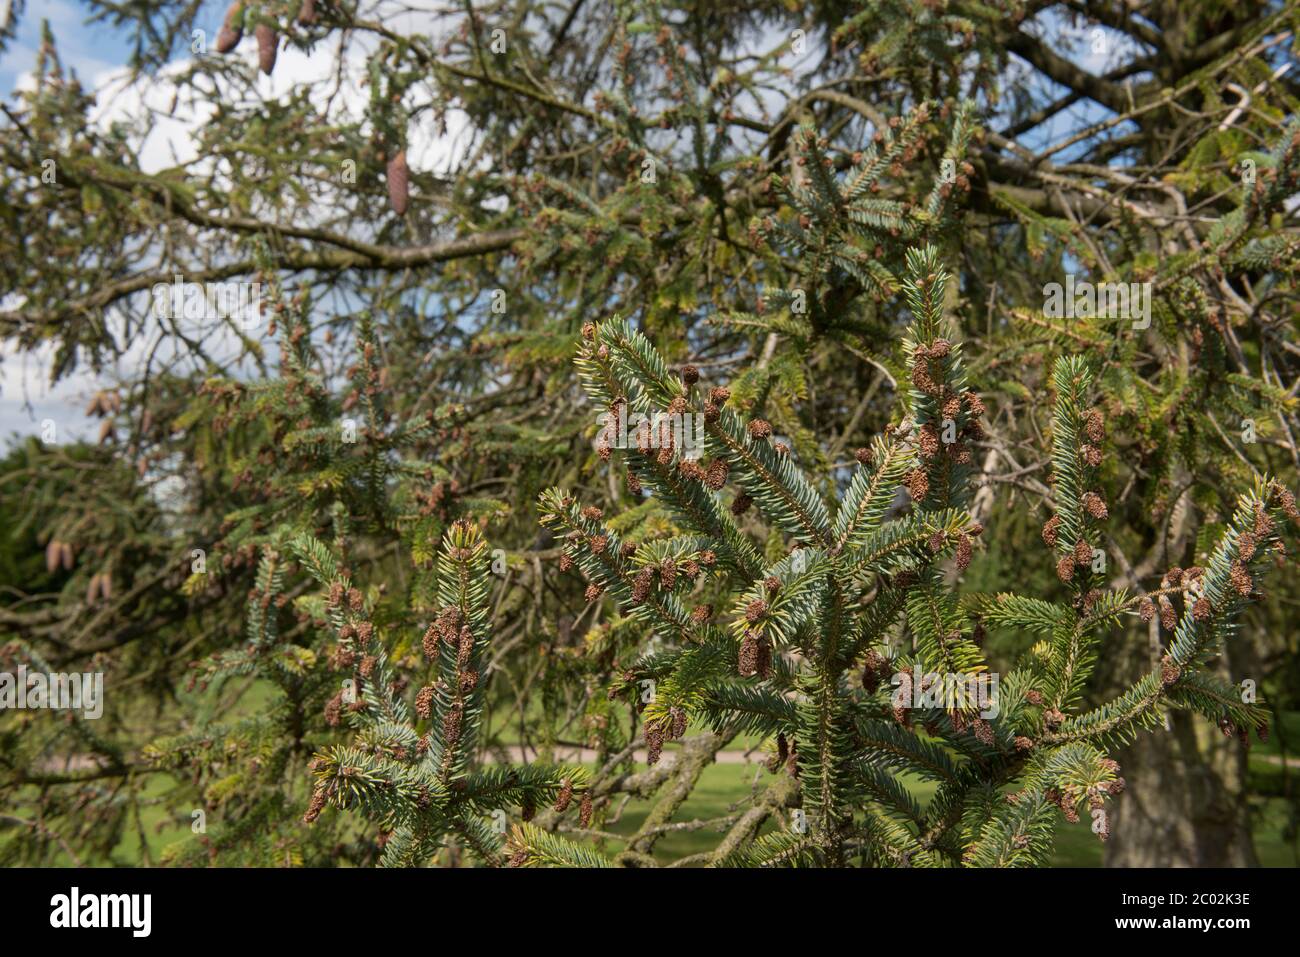 Summer Foliage and Brown Cones of a Likiang Spruce Tree (Picea likiangensis) in a Garden in Rural Cheshire, England, UK Stock Photo